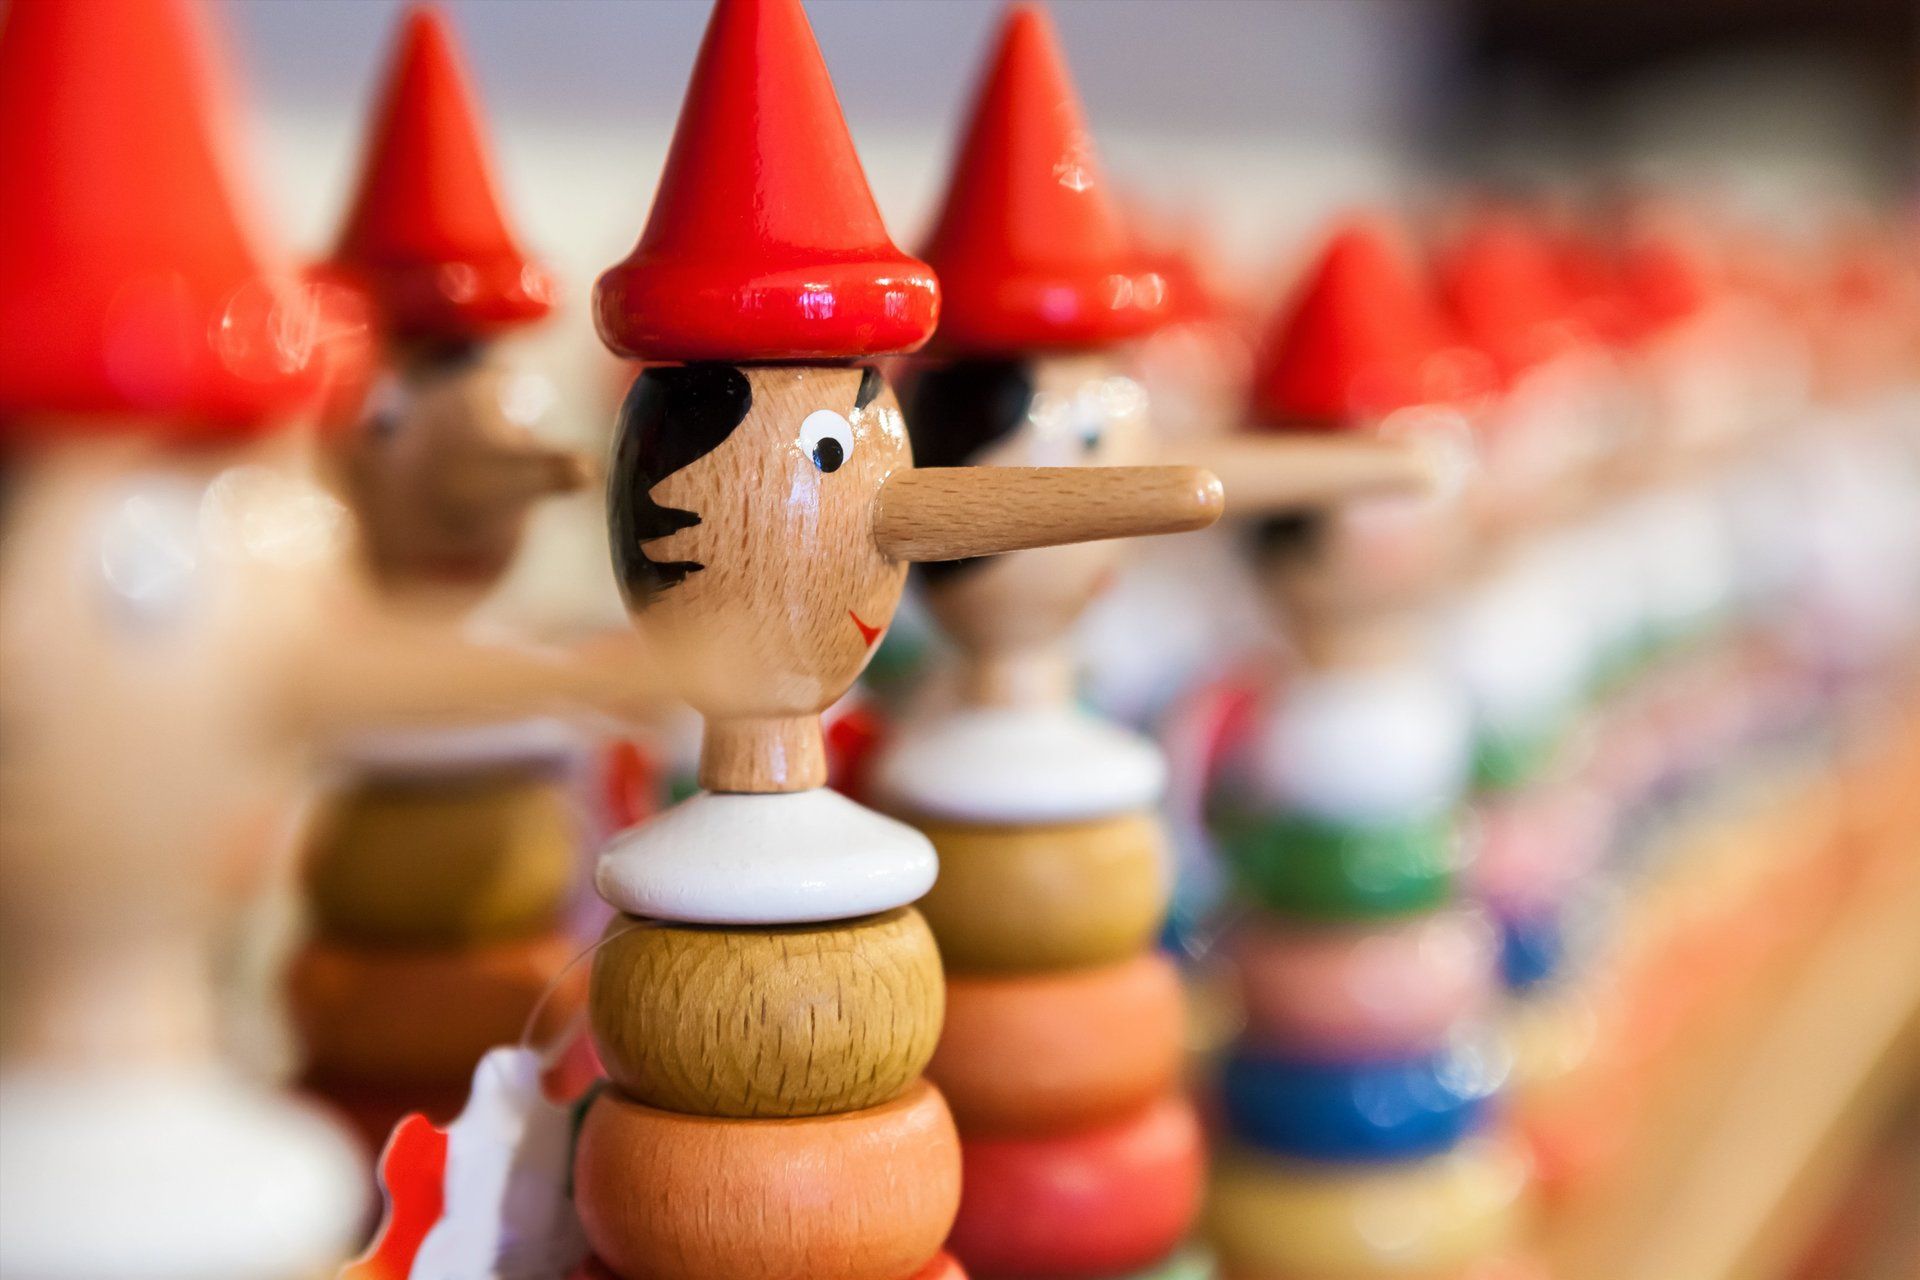 Colorful collection of wooden figures